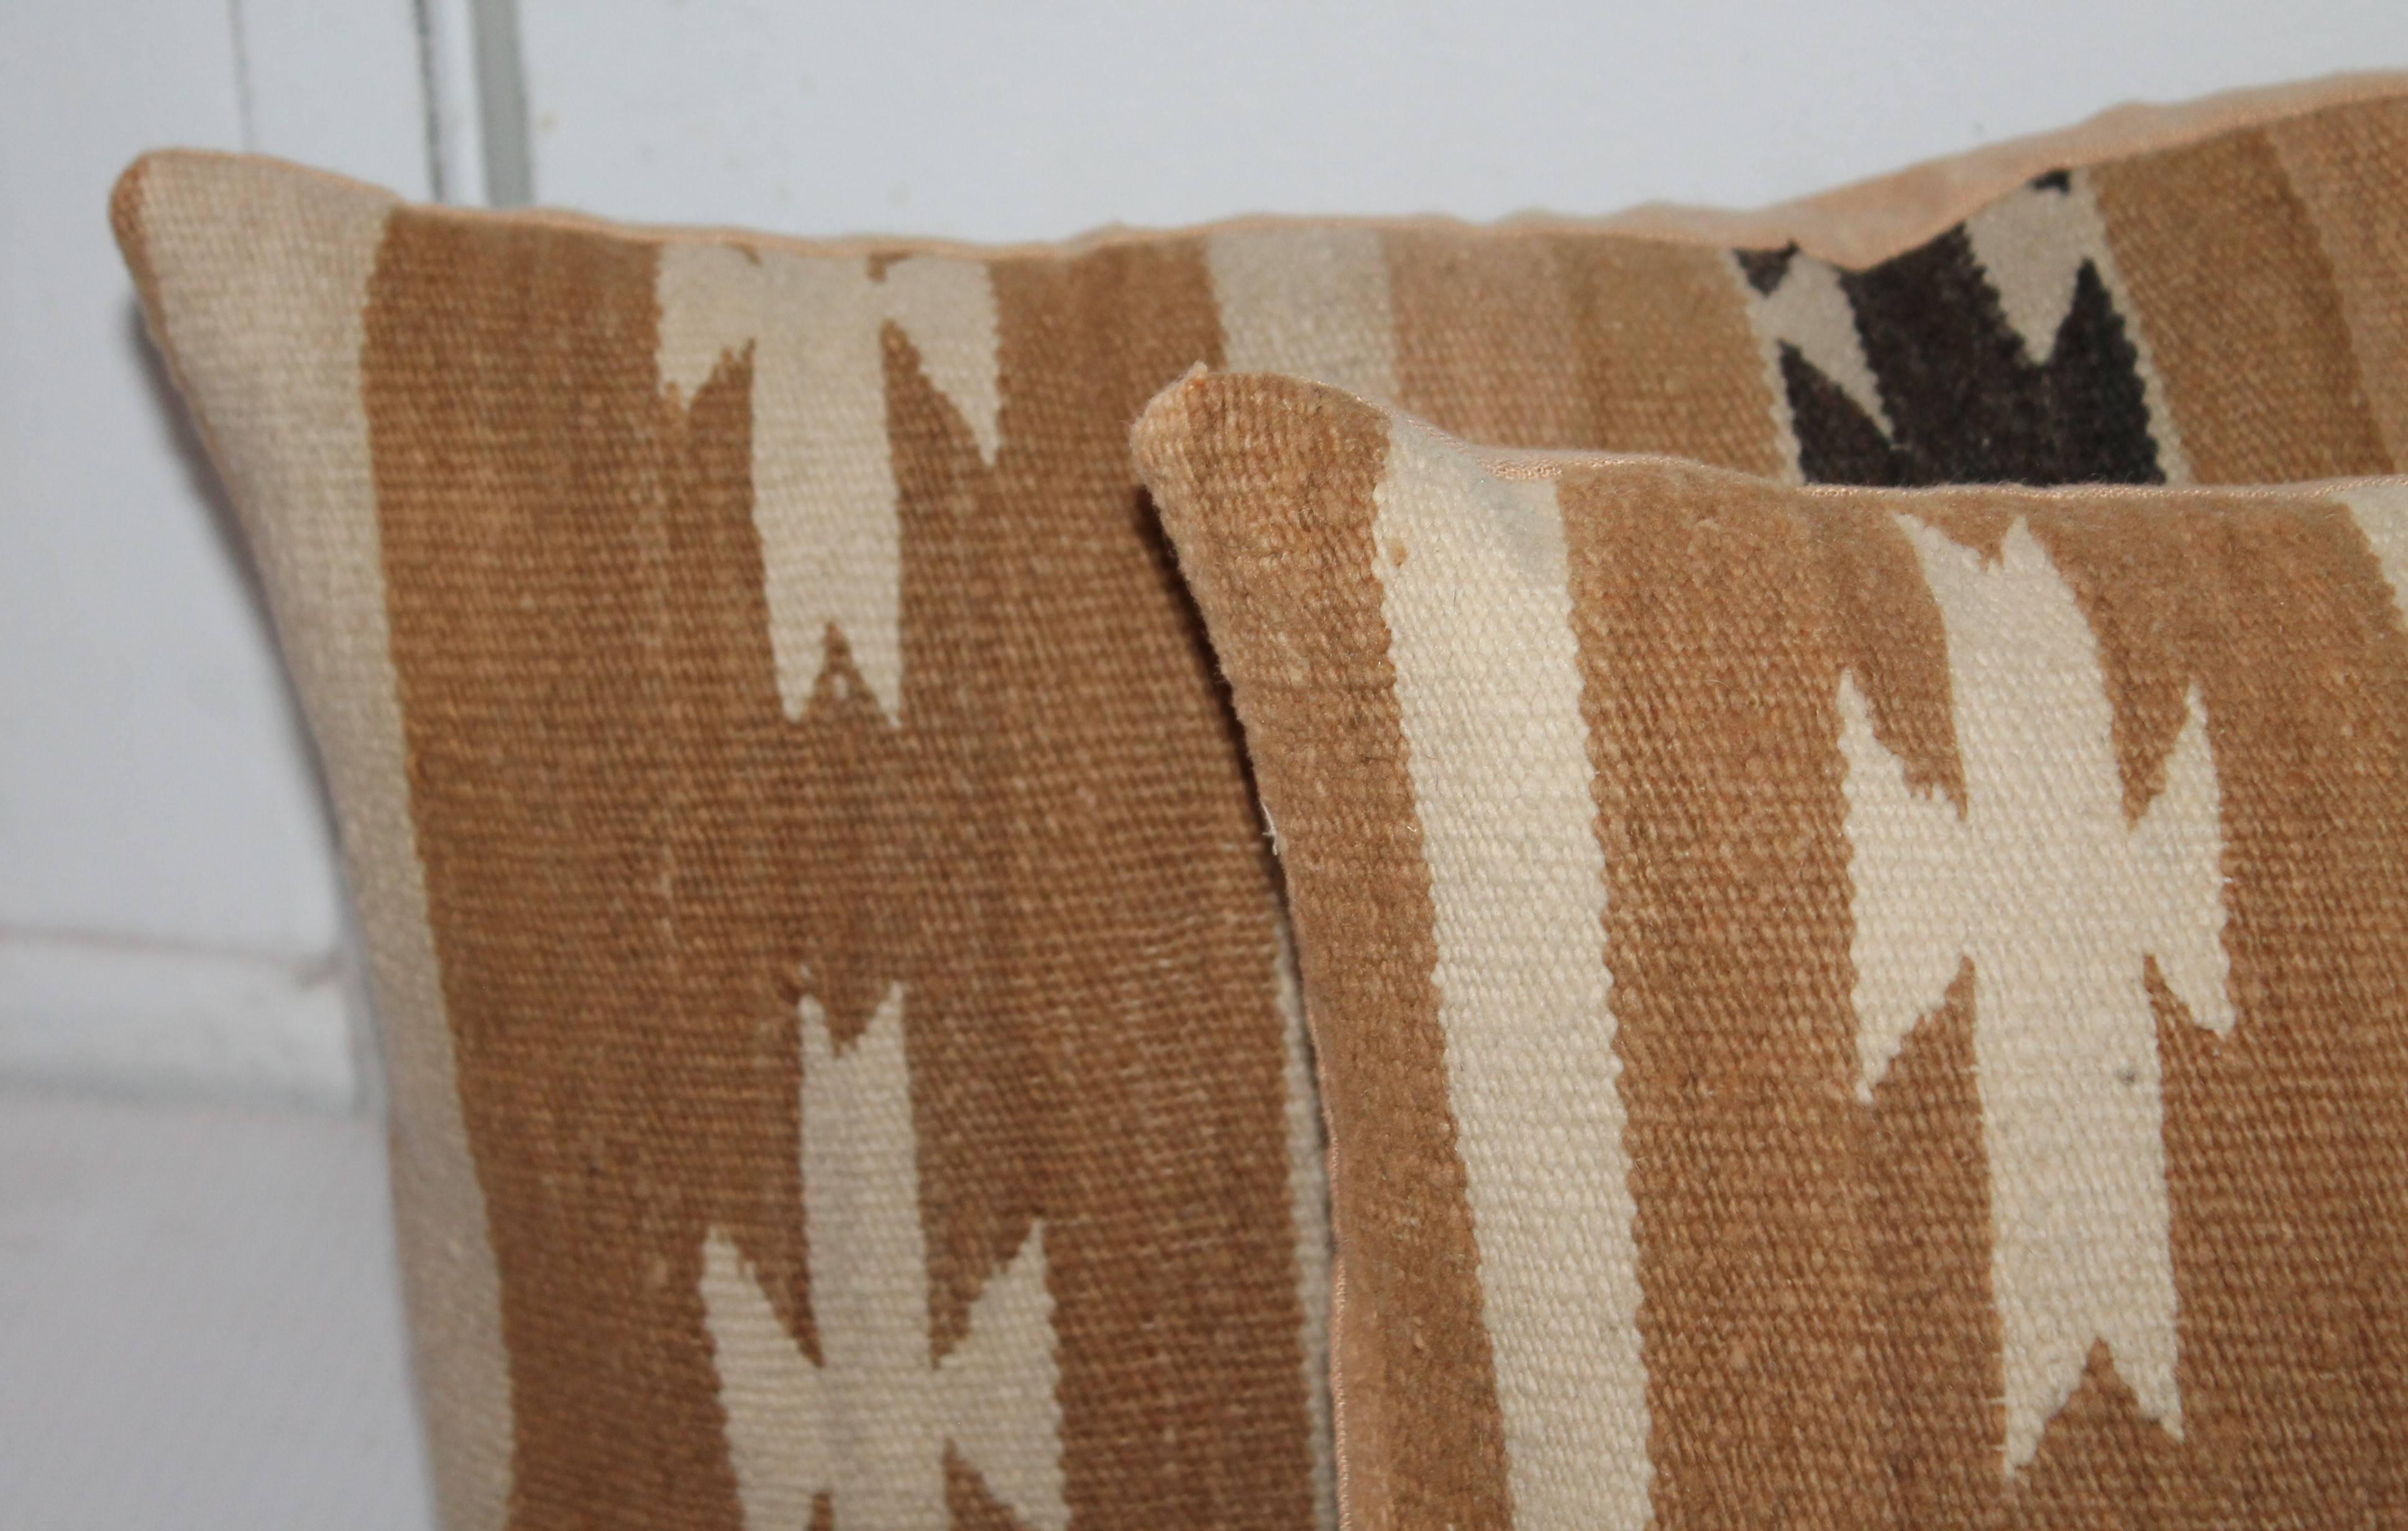 These weaving's have a nice mellow color and are in very good condition. The backing is in tan cotton linen.